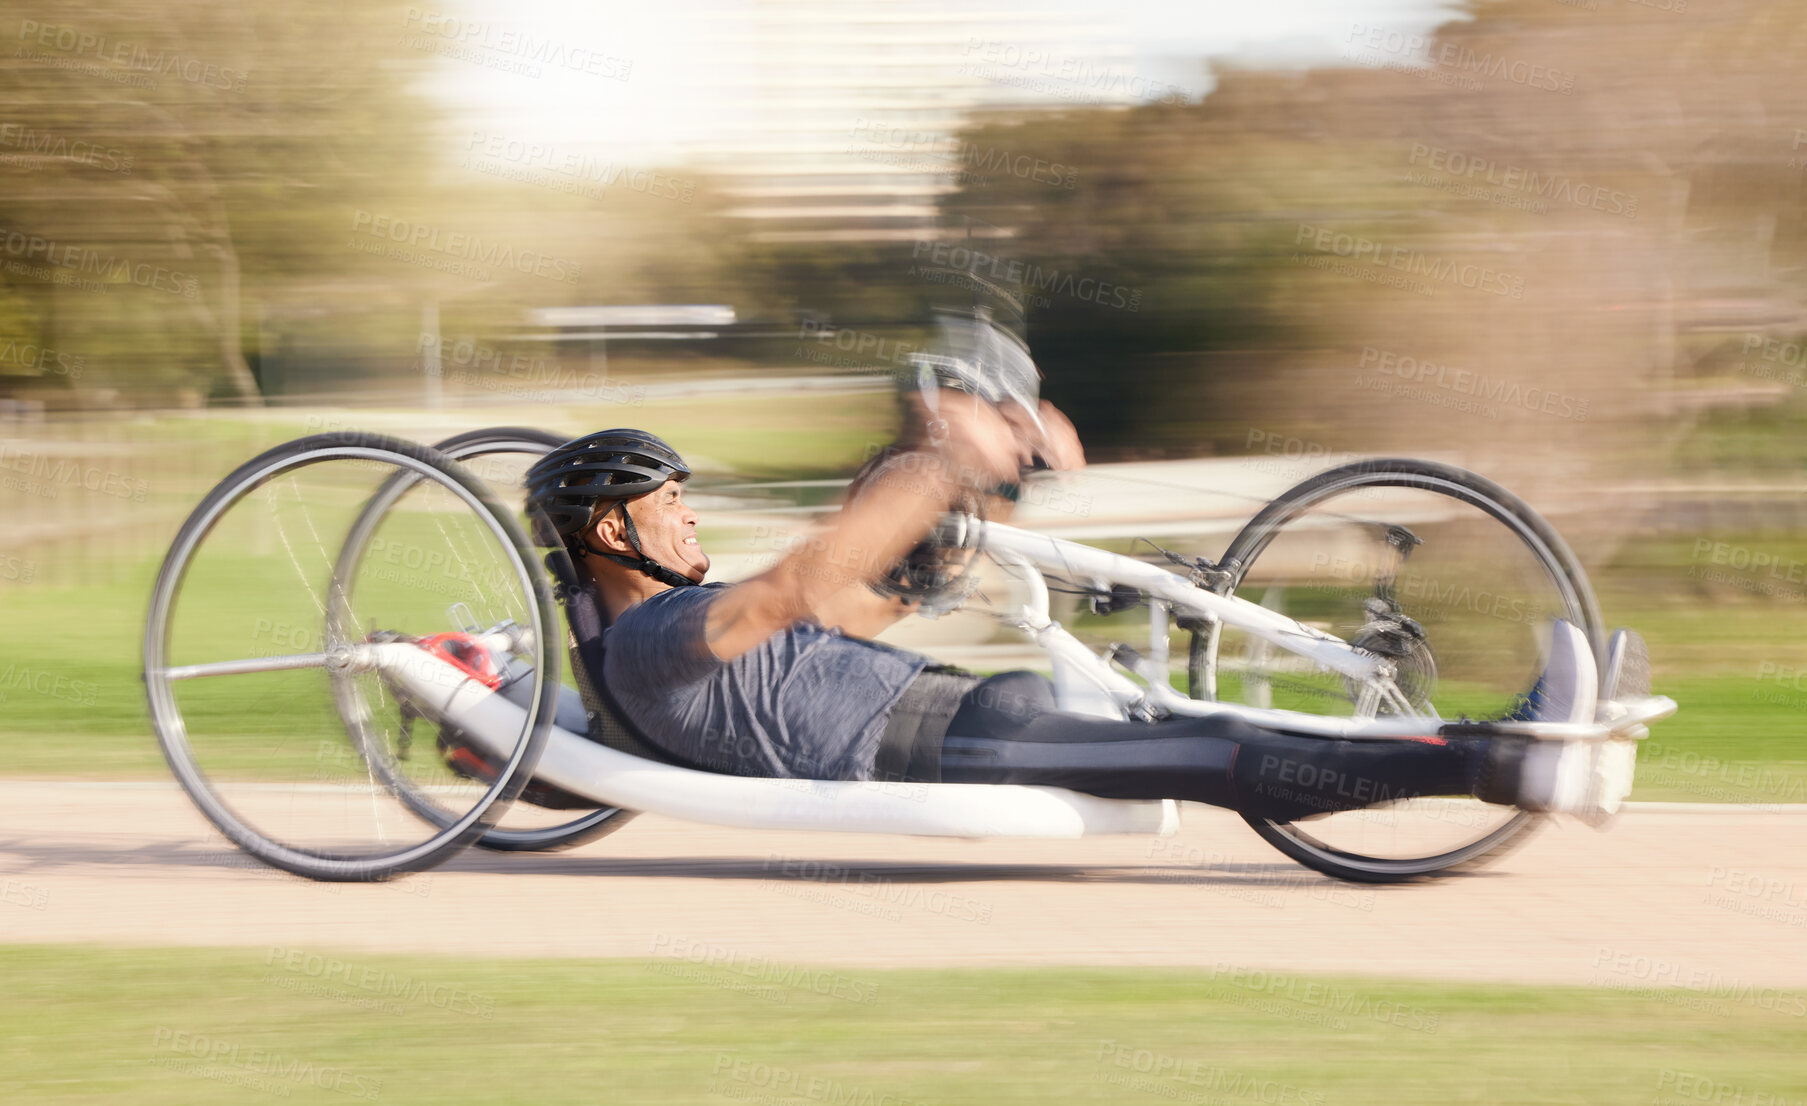 Buy stock photo Cycling, speed and man with disability in race training for competition with action, motivation and exercise on bike. Energy, workout and person on recumbent bicycle on fast outdoor track challenge.